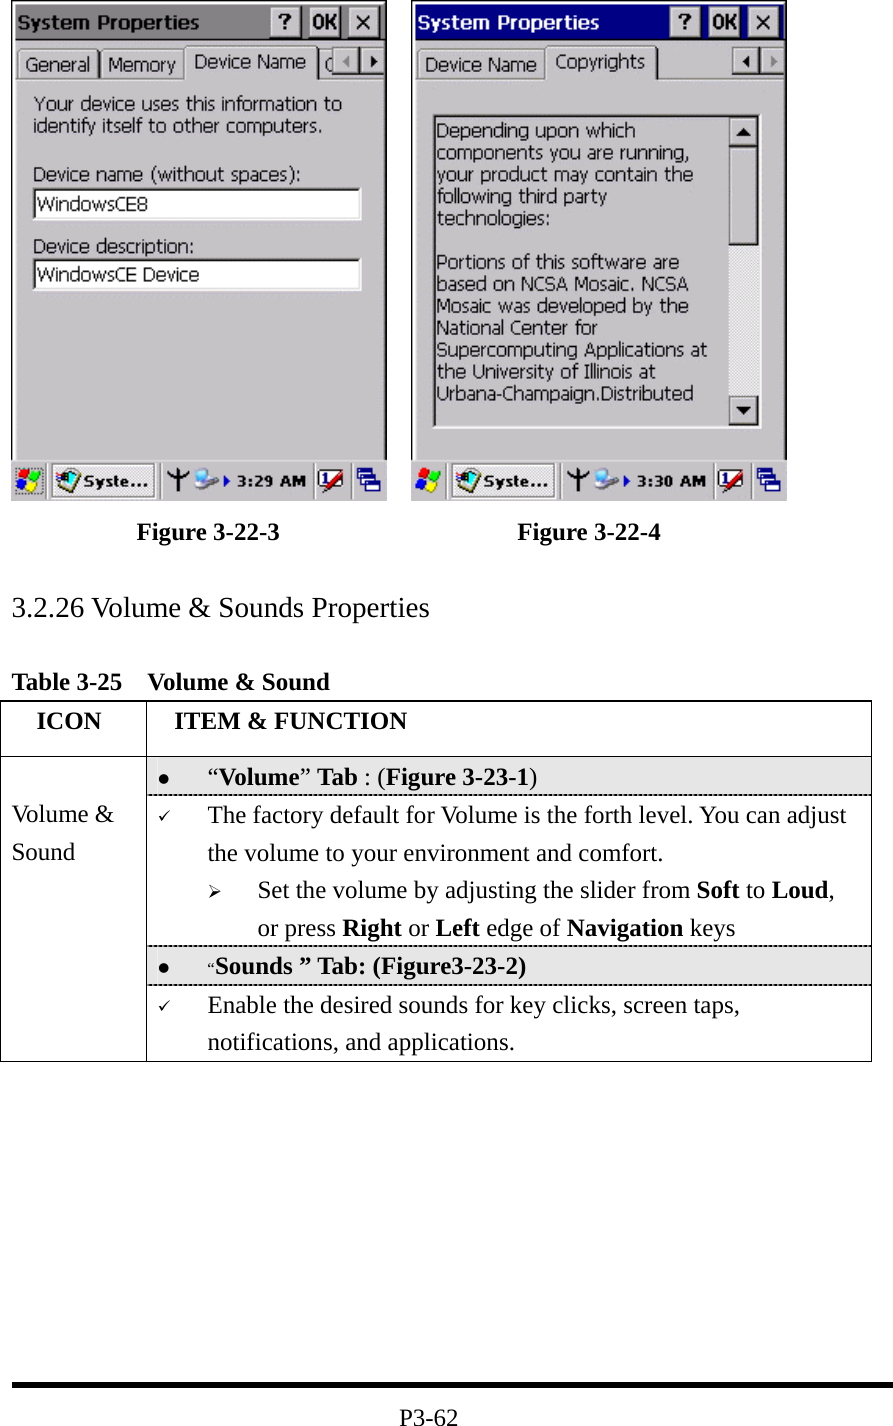               Figure 3-22-3                   Figure 3-22-4  3.2.26 Volume &amp; Sounds Properties  Table 3-25    Volume &amp; Sound   ICON   ITEM &amp; FUNCTION   “Volume” Tab : (Figure 3-23-1)   The factory default for Volume is the forth level. You can adjust the volume to your environment and comfort.     Set the volume by adjusting the slider from Soft to Loud, or press Right or Left edge of Navigation keys   “Sounds ” Tab: (Figure3-23-2)  Volume &amp; Sound   Enable the desired sounds for key clicks, screen taps, notifications, and applications.          P3-62 